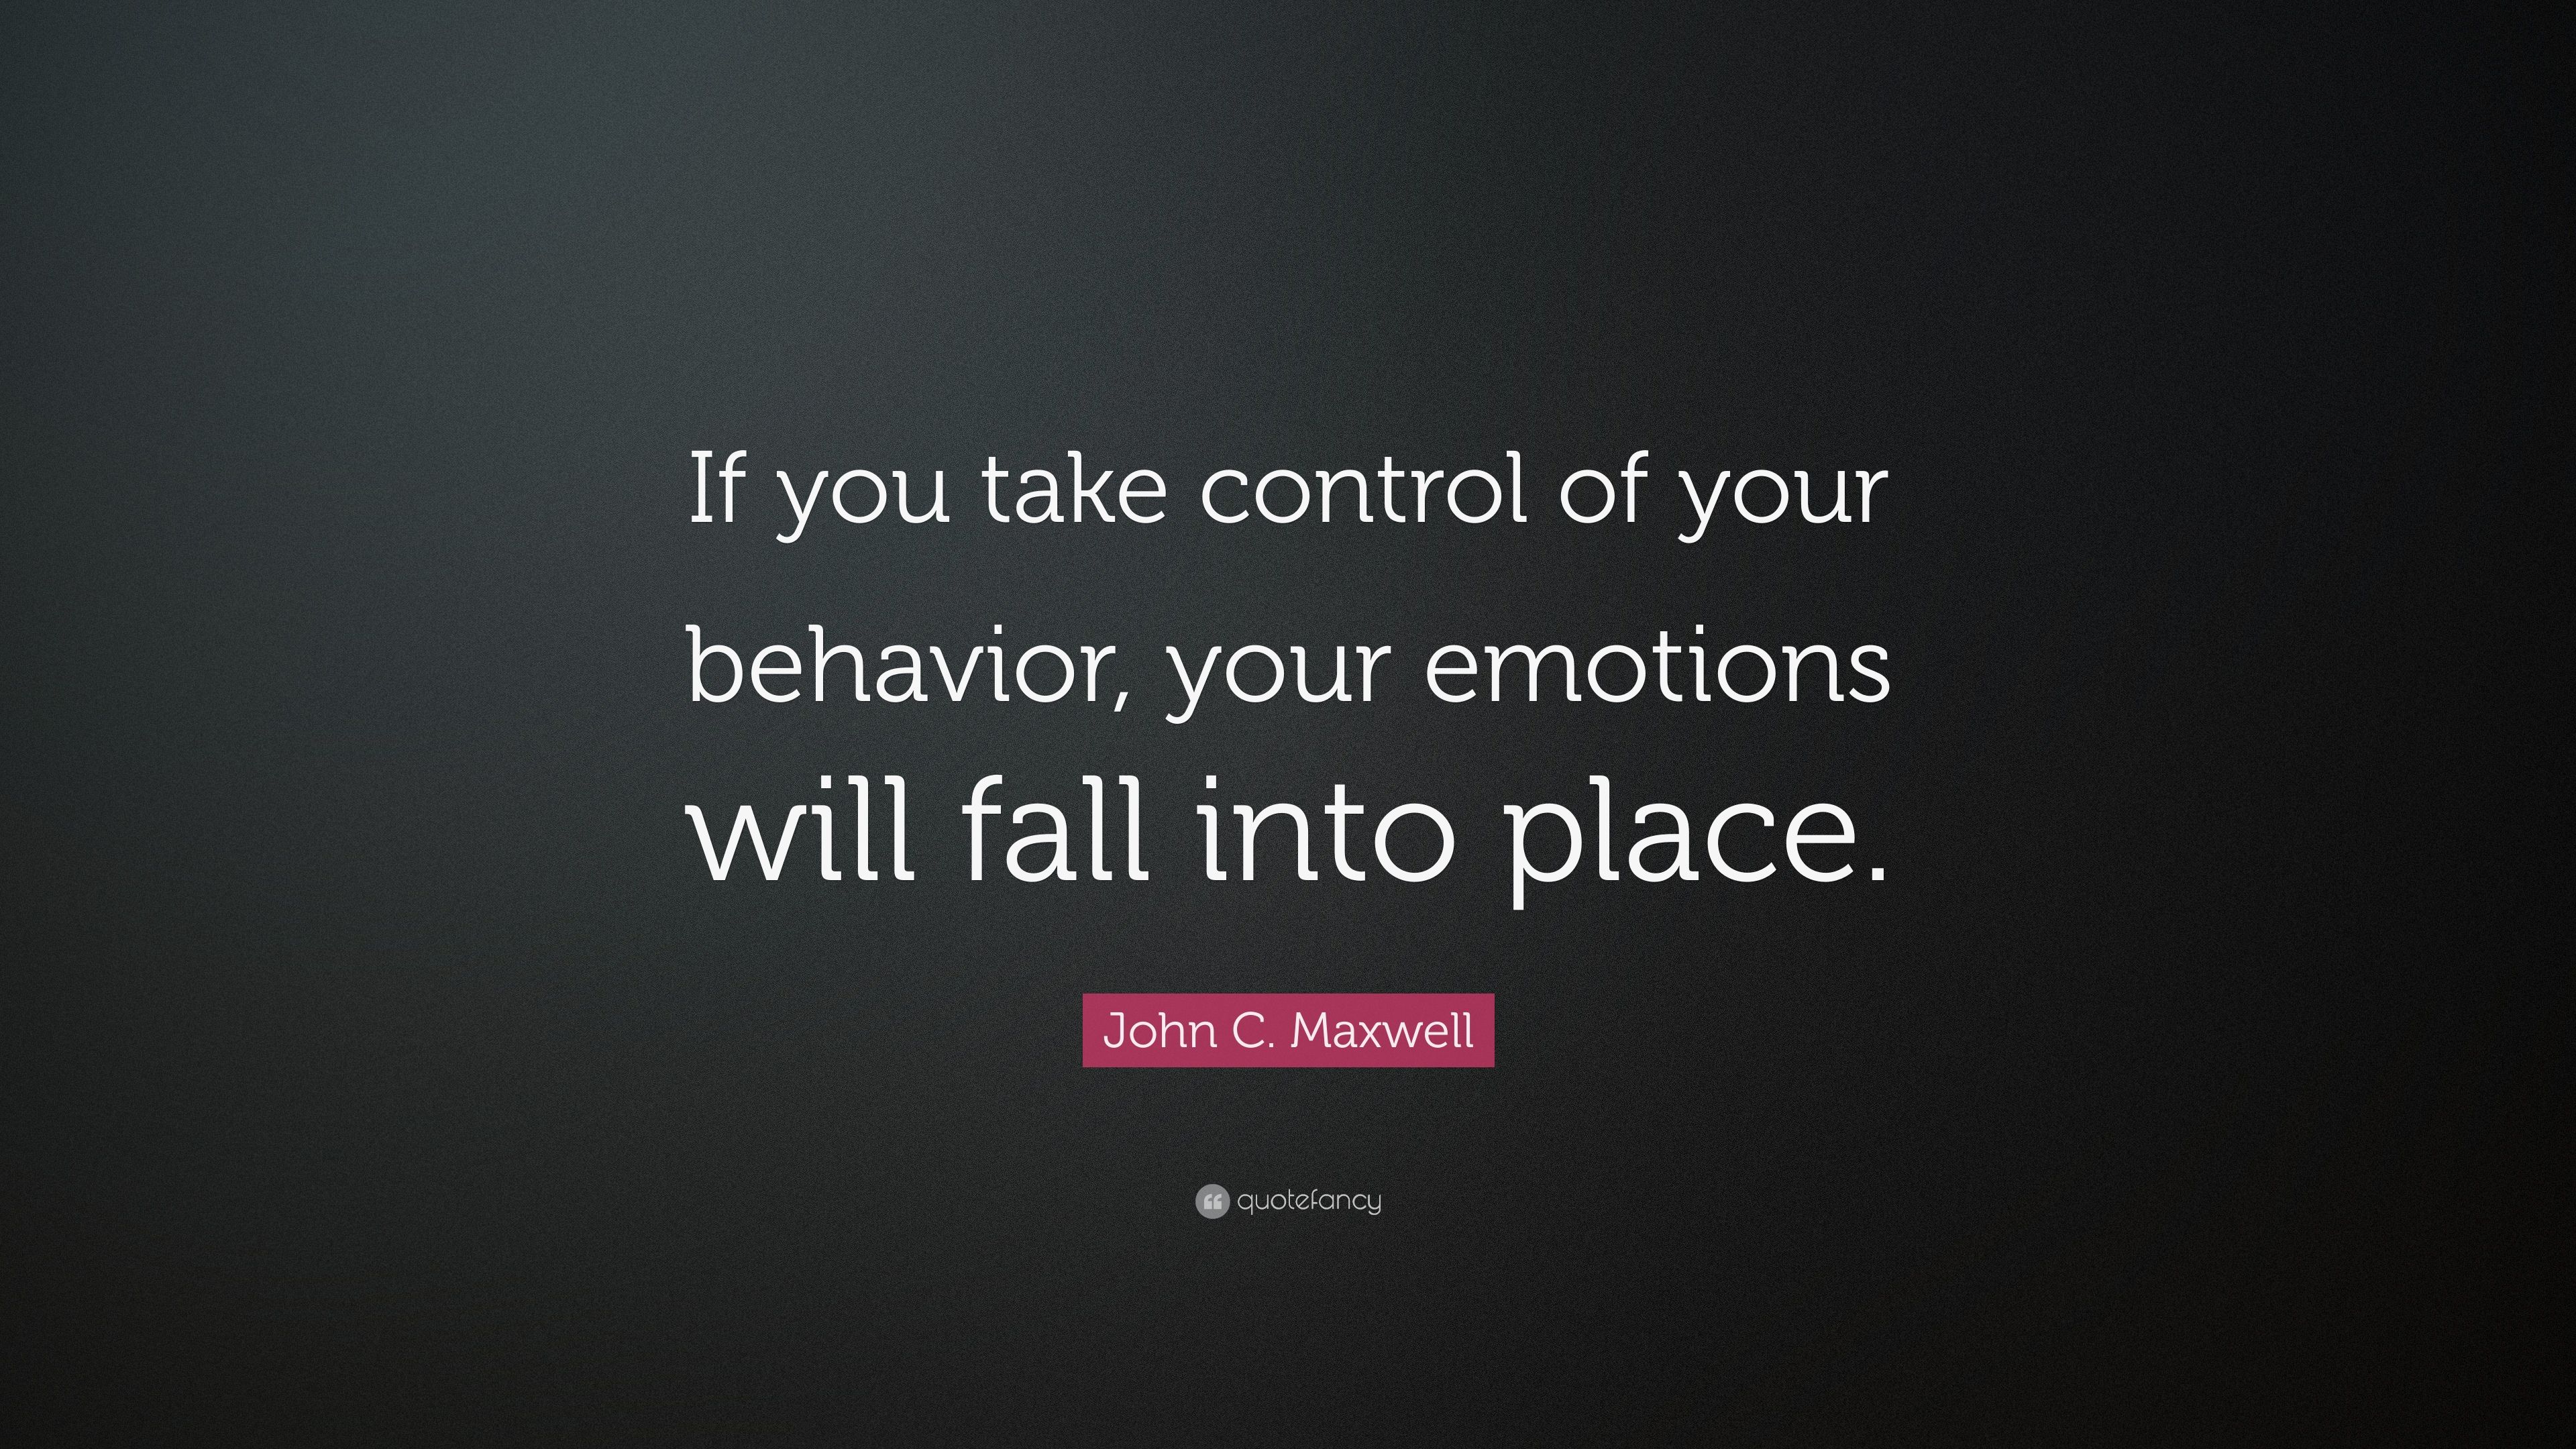 John C. Maxwell Quote: “If you take control of your behavior, your emotions will fall into place.” (7 wallpaper)